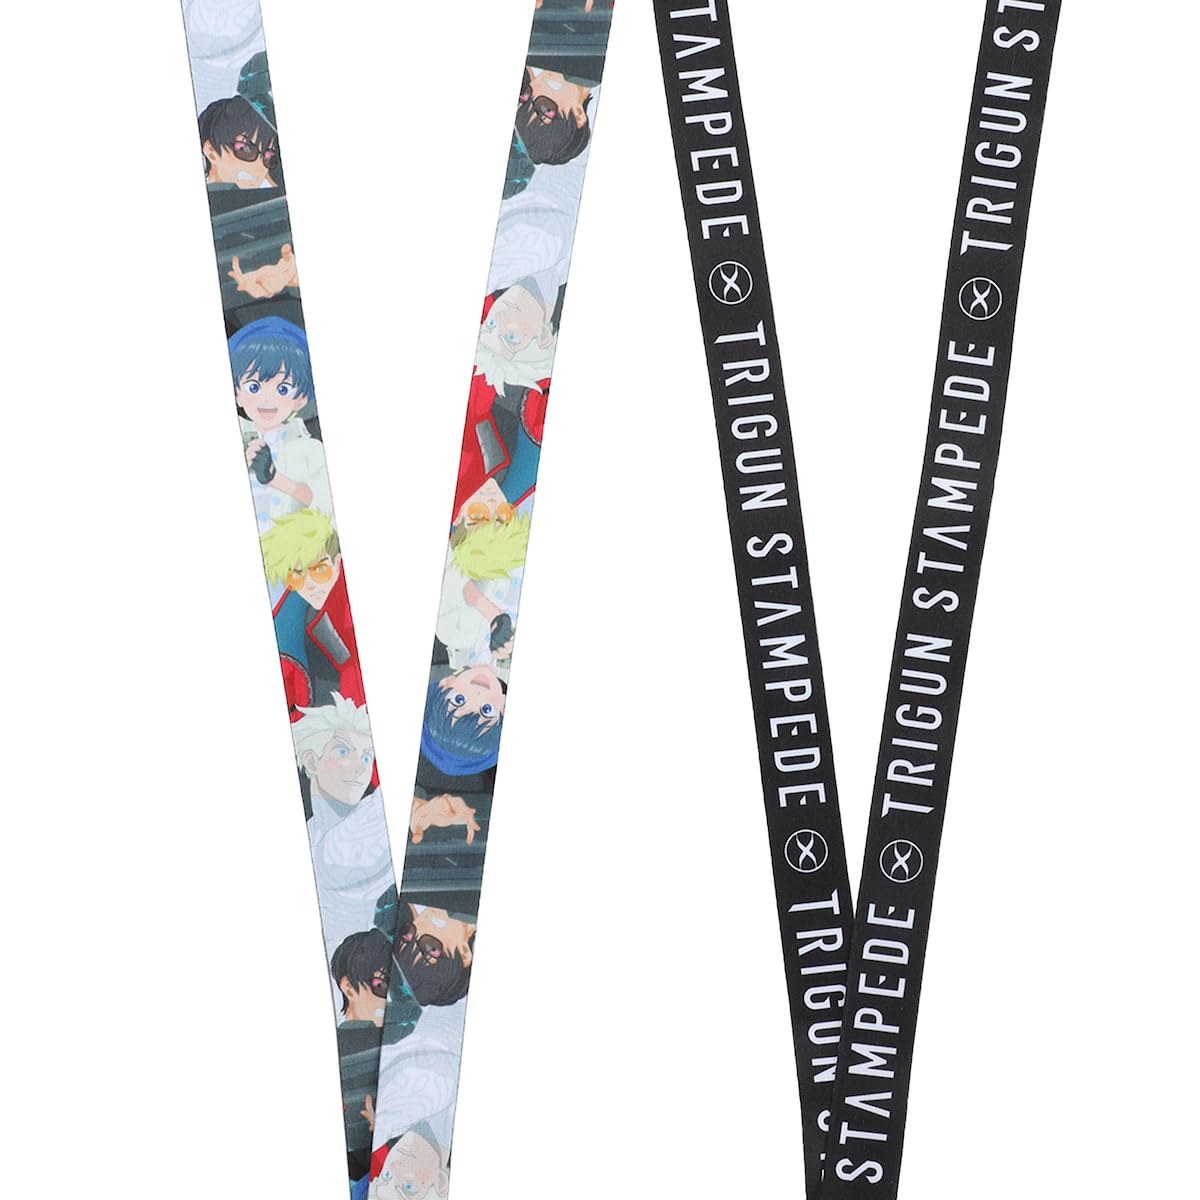 Trigun Stampede Lanyard with Collectible Charm and ID Holder